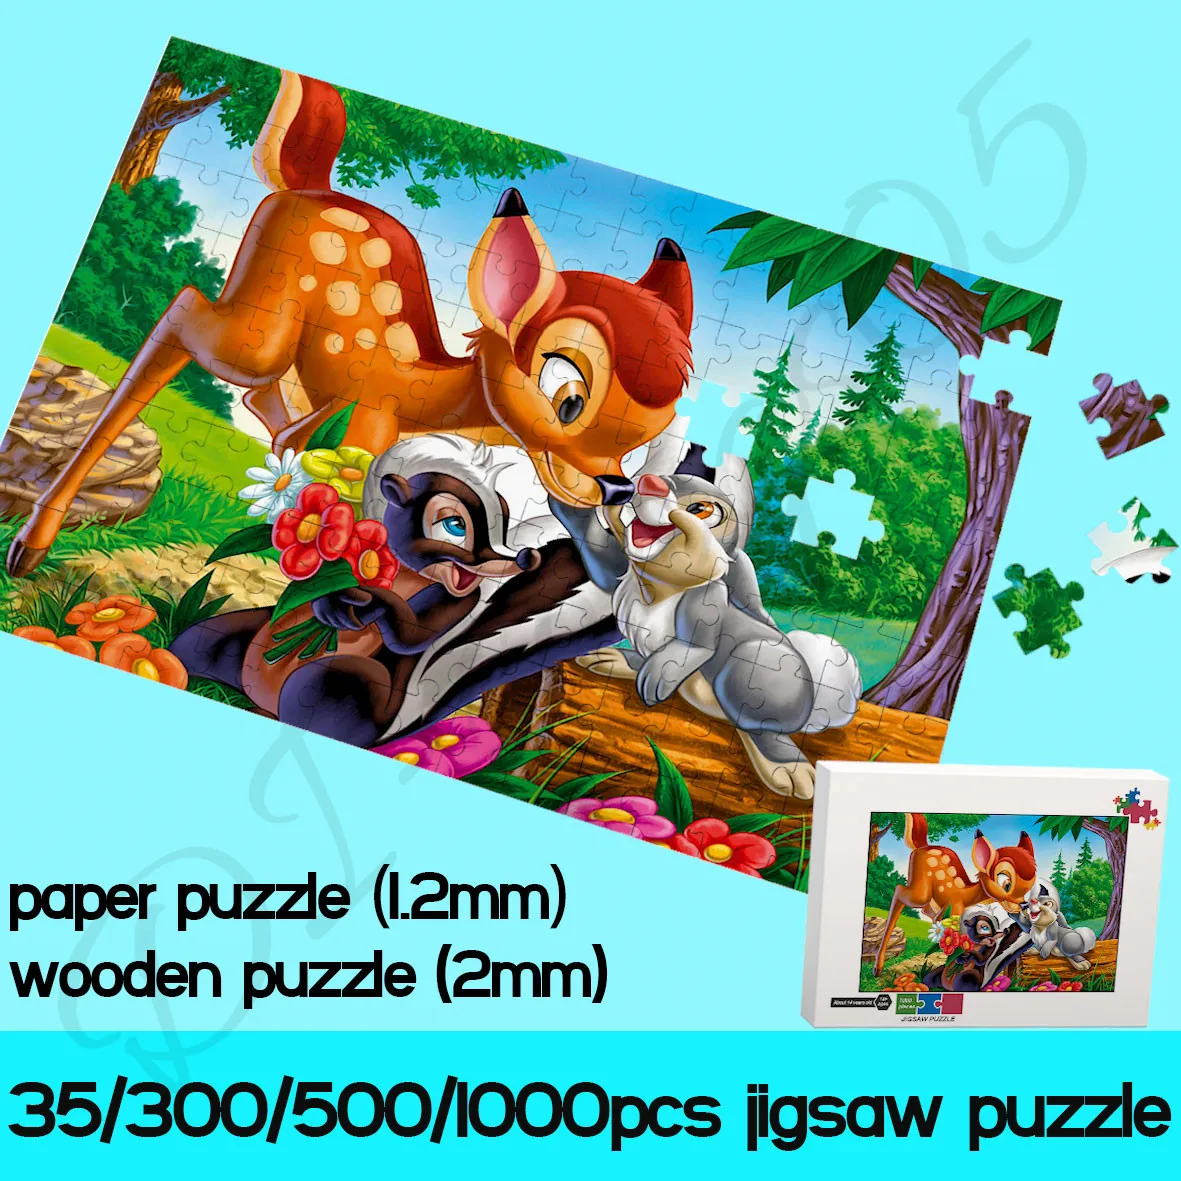 Bambi Jigsaw Puzzles Disney Animation 35/300/500/1000 Piece Paper and Wooden Puzzles Cartoon Decompress Handmade Toys for Kids bambi cartoon puzzles for kids disney feature length animation 35 300 500 1000 pieces of wooden jigsaw puzzles toys and hobbies